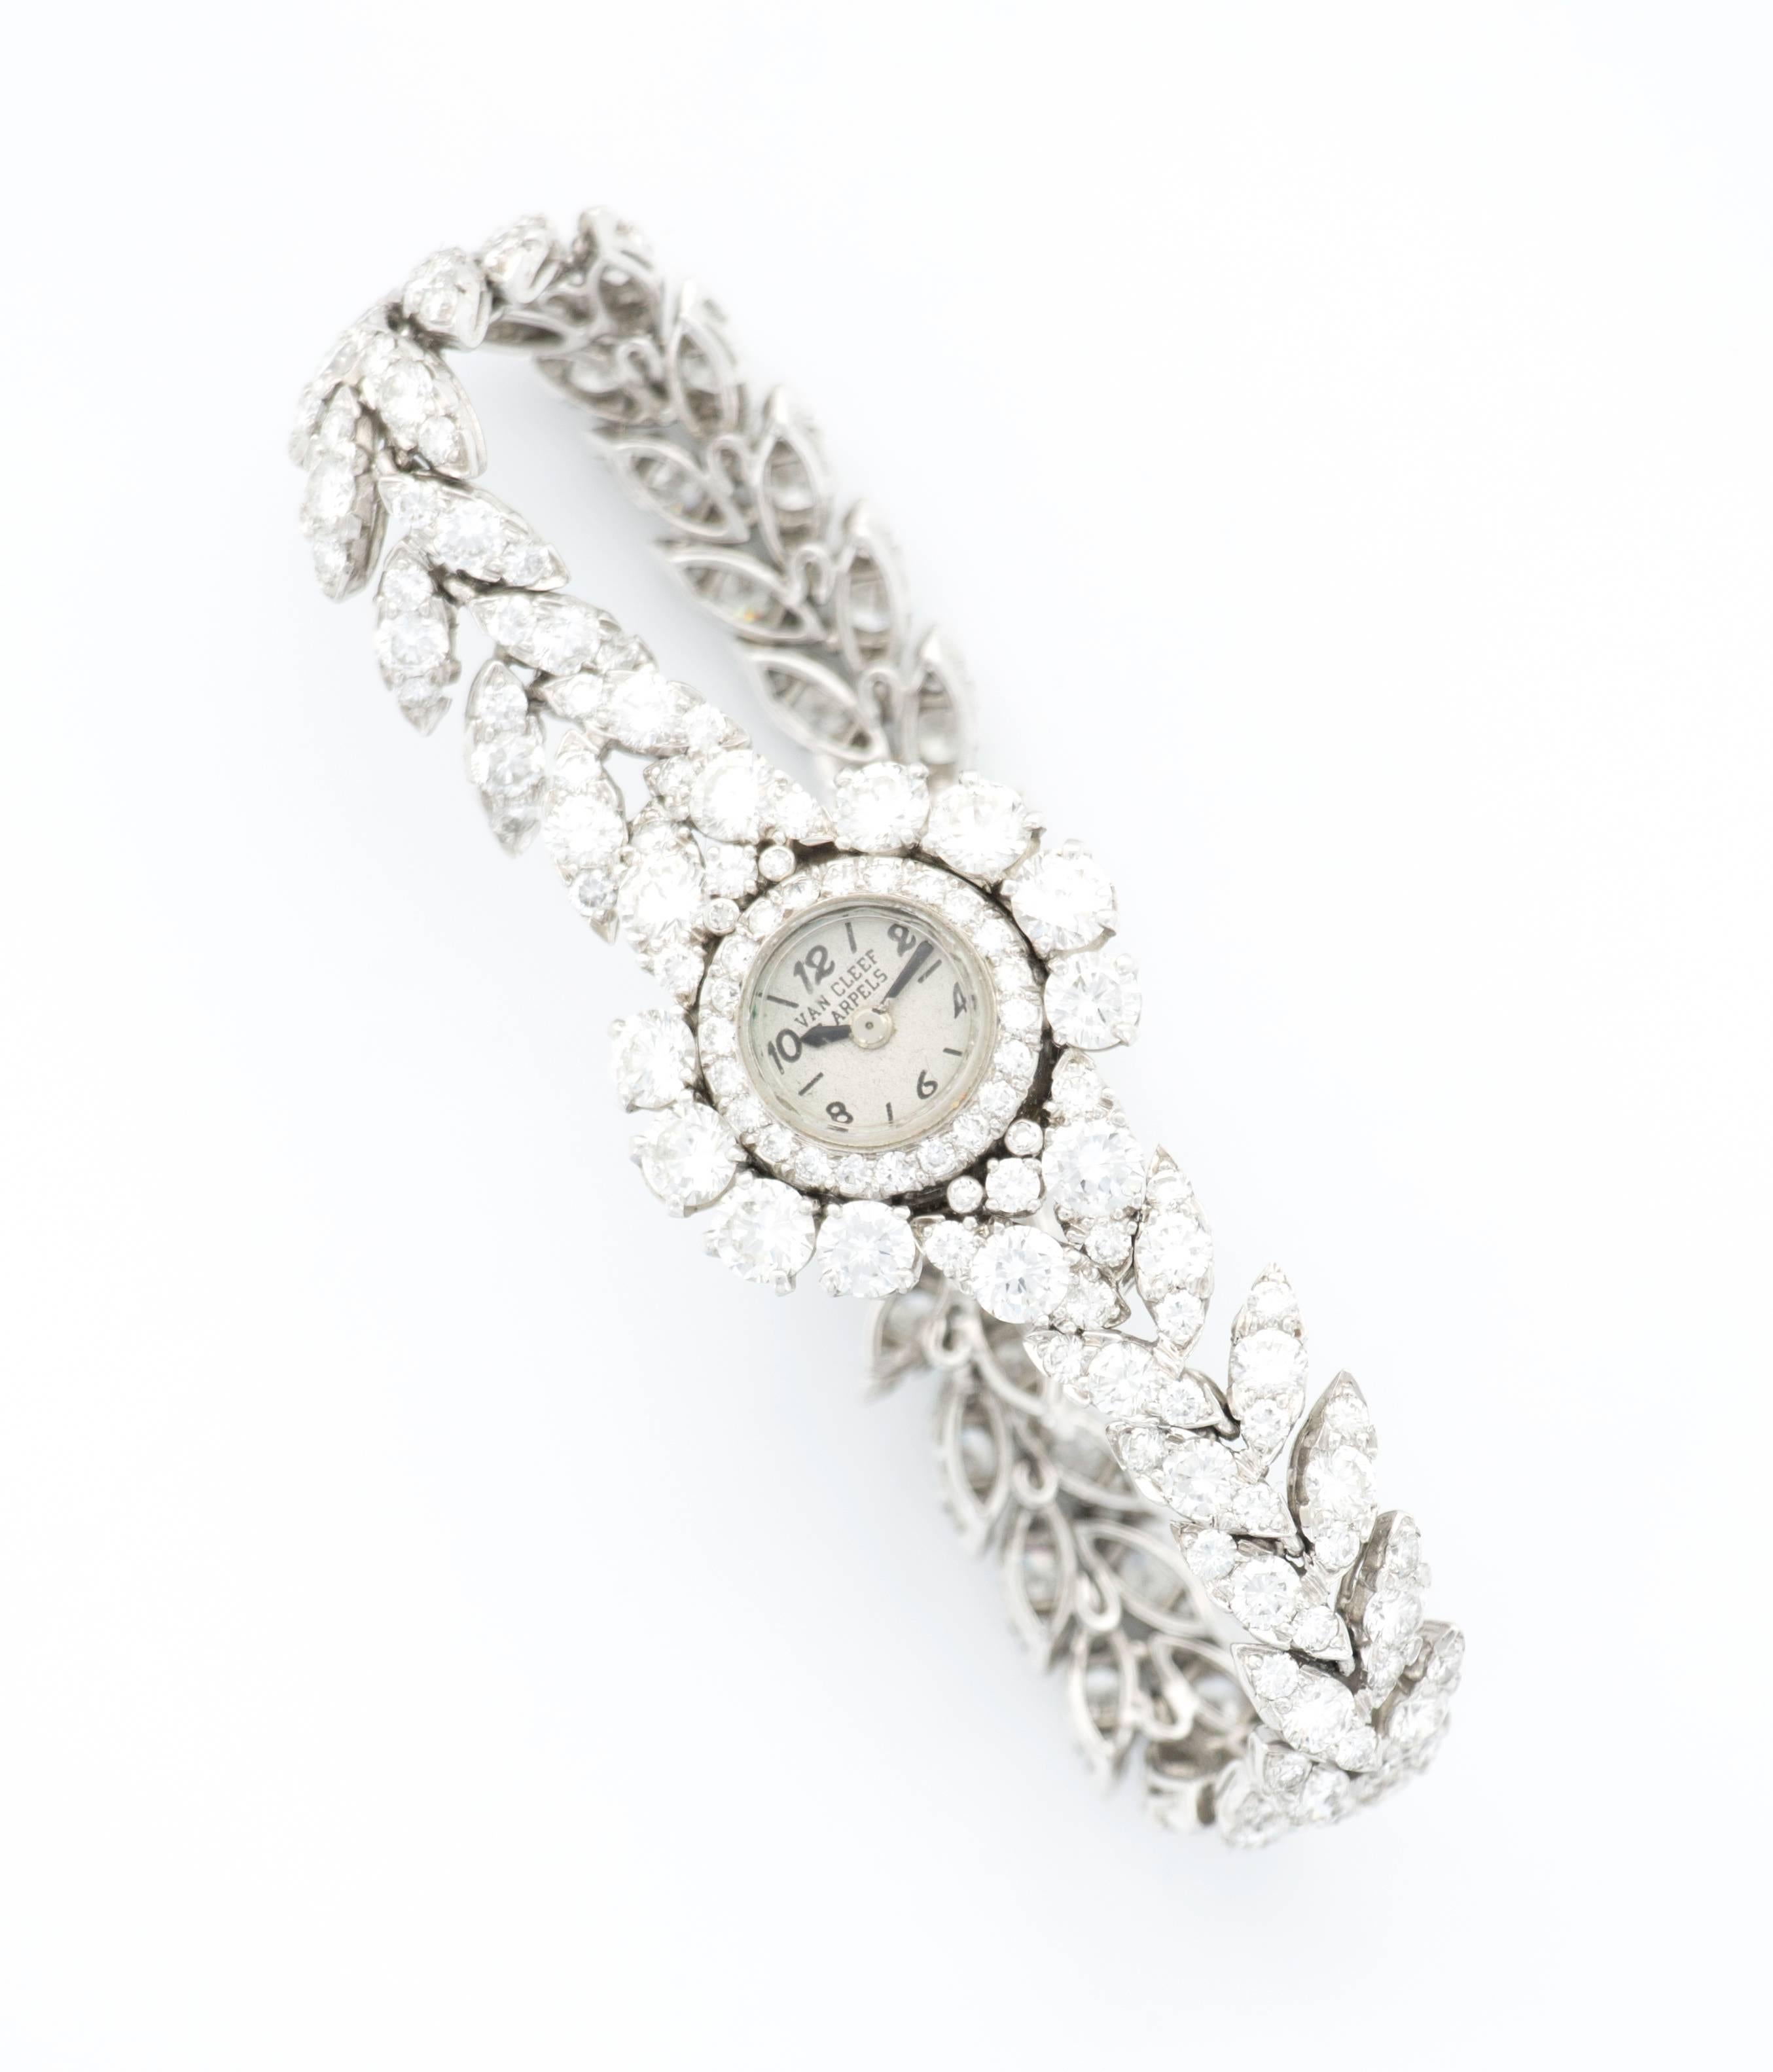 An Absolutely Beautiful Diamond-Set Bracelet Watch by Van Cleef & Arpels. Completely original with numbered and signed V.C.A. 

Mechanical Wind

1950's